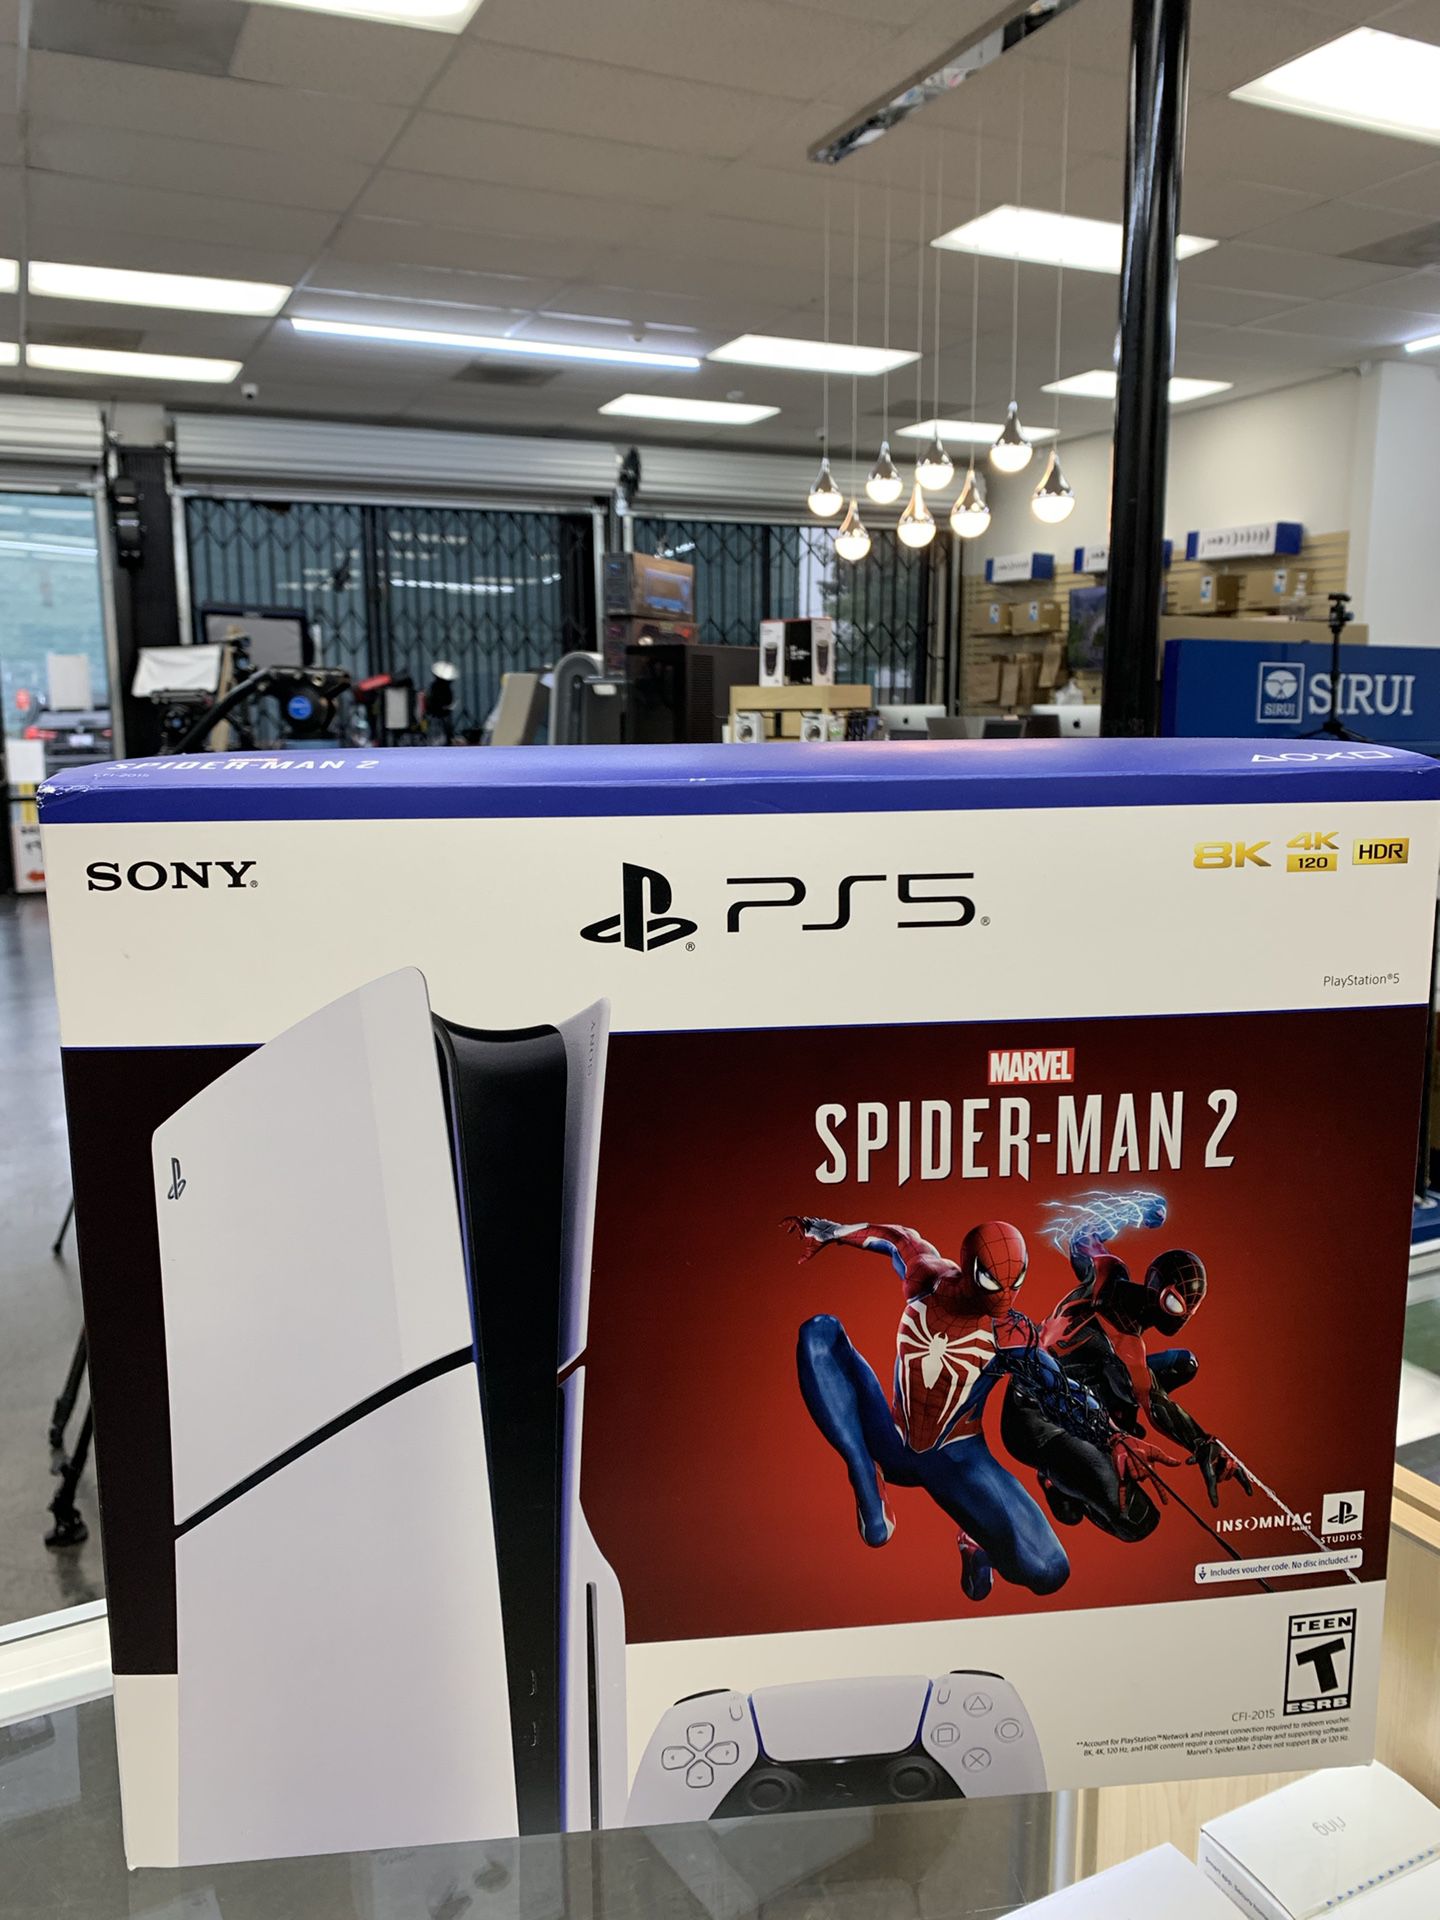 PlayStation 5. Spider Man 2. Disc Edition. $50 To Get It Today 